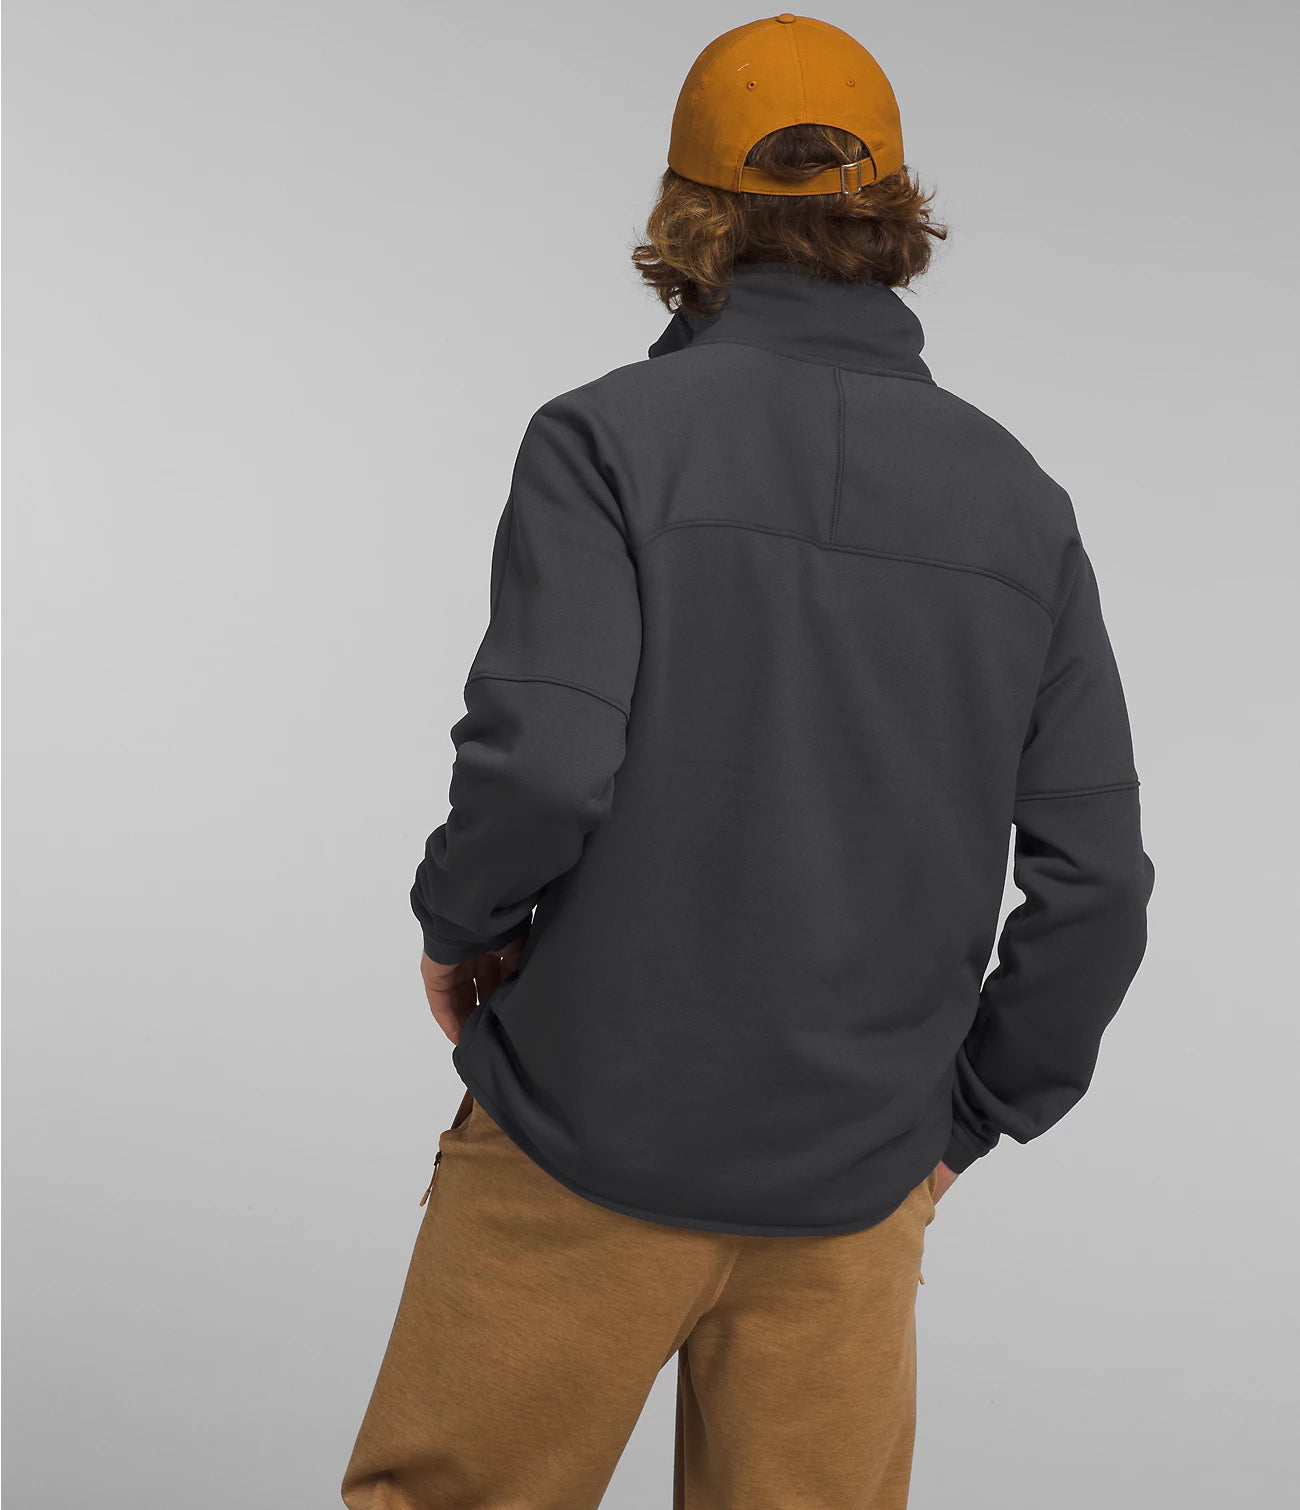 The North Face Men's Canyonlands High Altitude ½ Zip